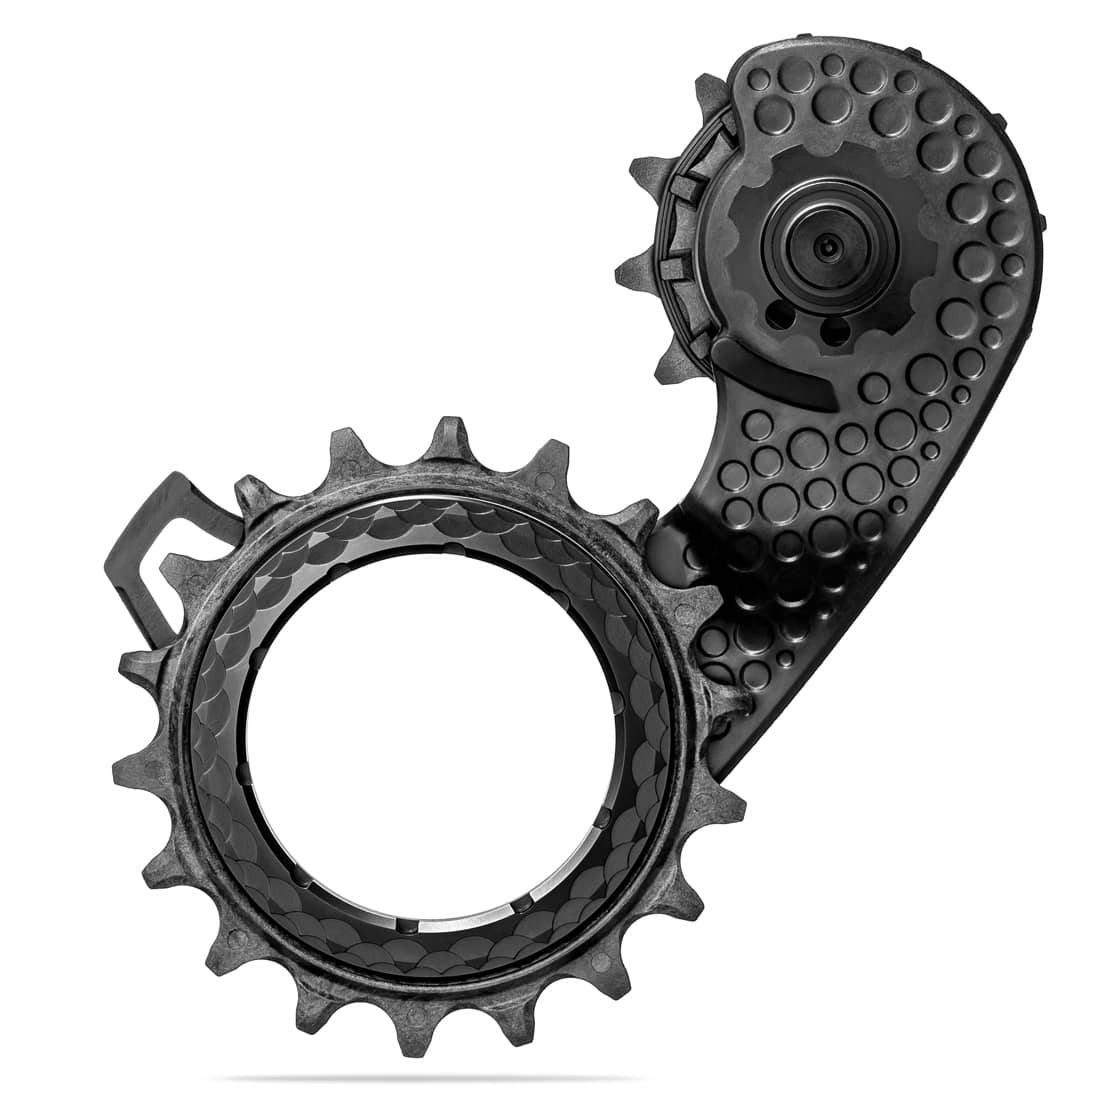 Hollowcage carbon ceramic oversized derailleur pulley cage